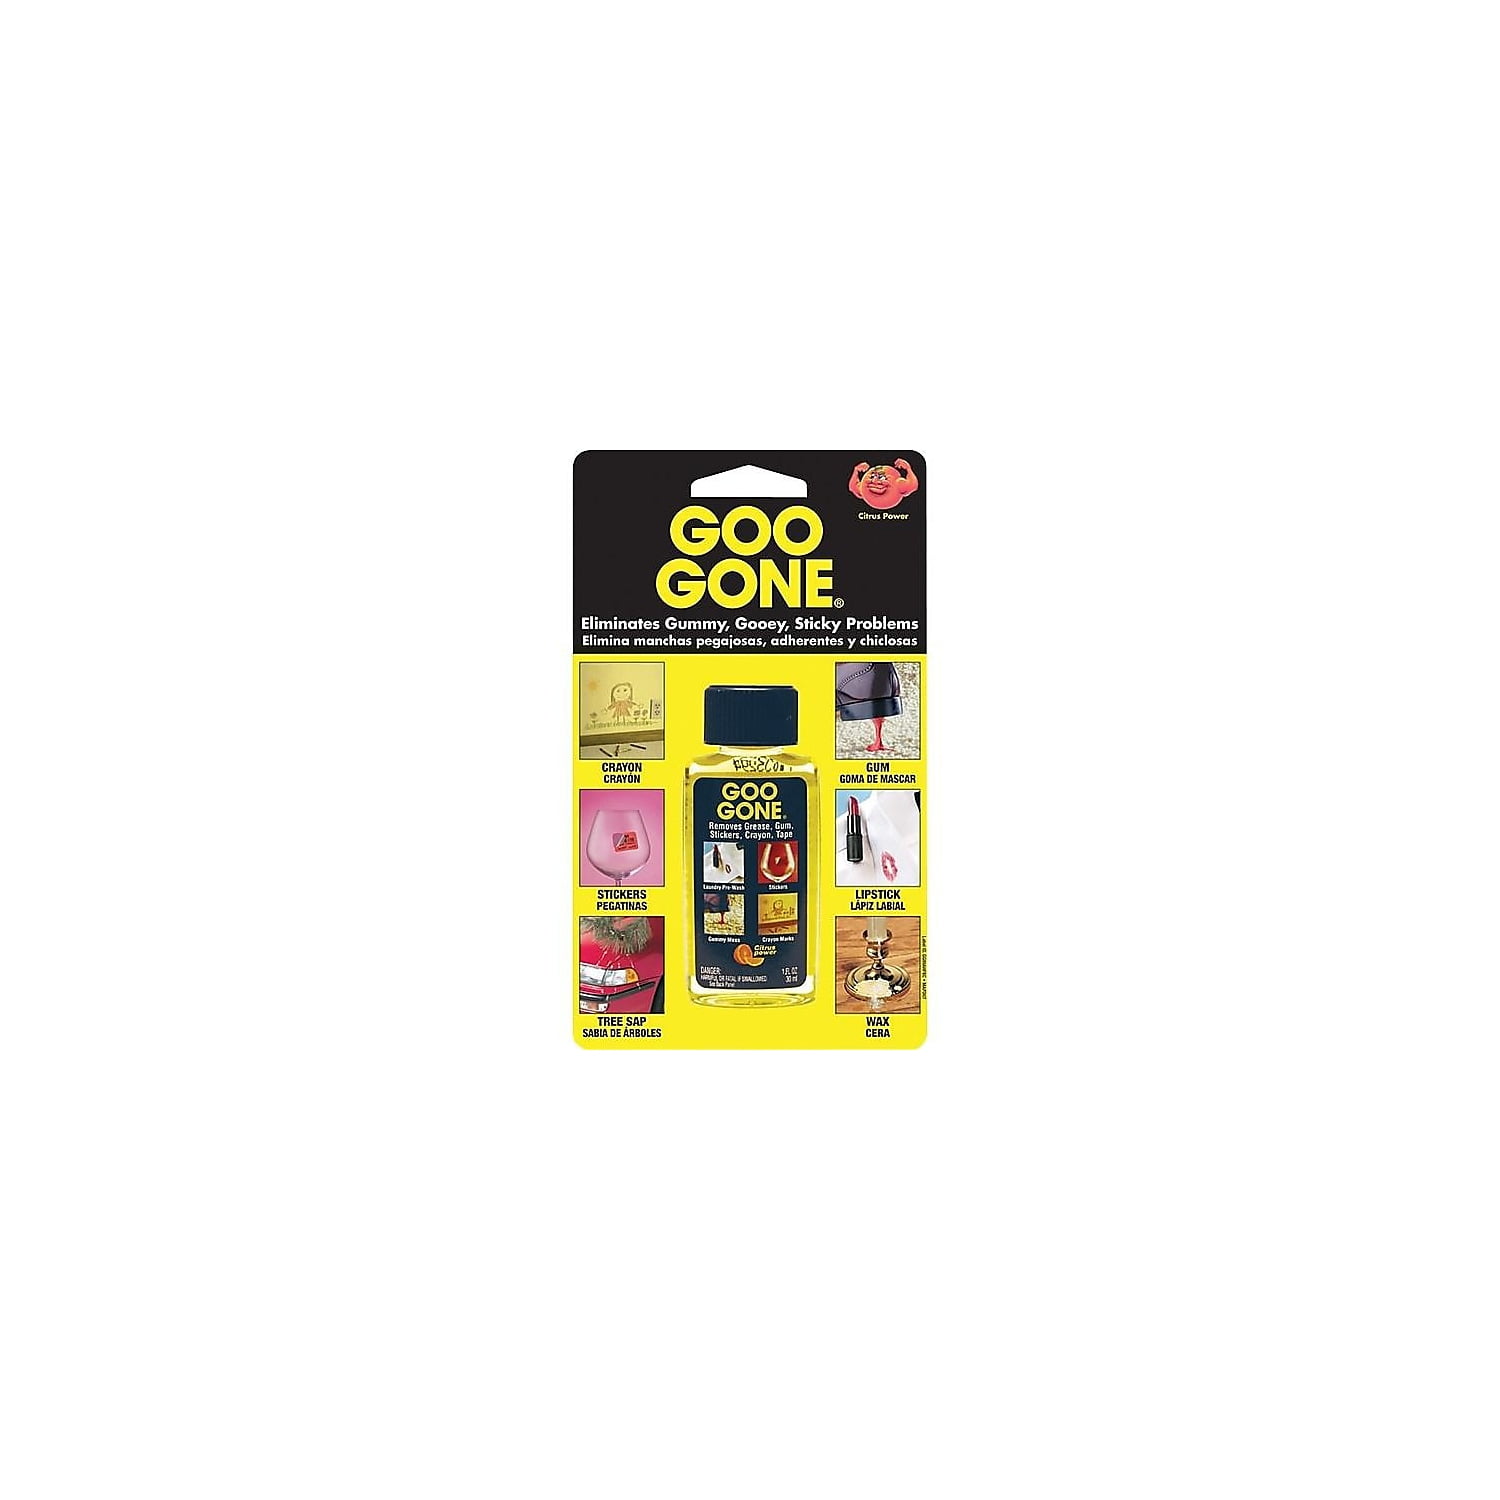 Goo Gone Adhesive Remover 4 oz - Citrus Power Liquid Pour Bottle - Removes  Grease, Stickers, Tar, Gum, Crayon and Tape - Home, Shop, Car, Garage in  the Adhesive Removers department at